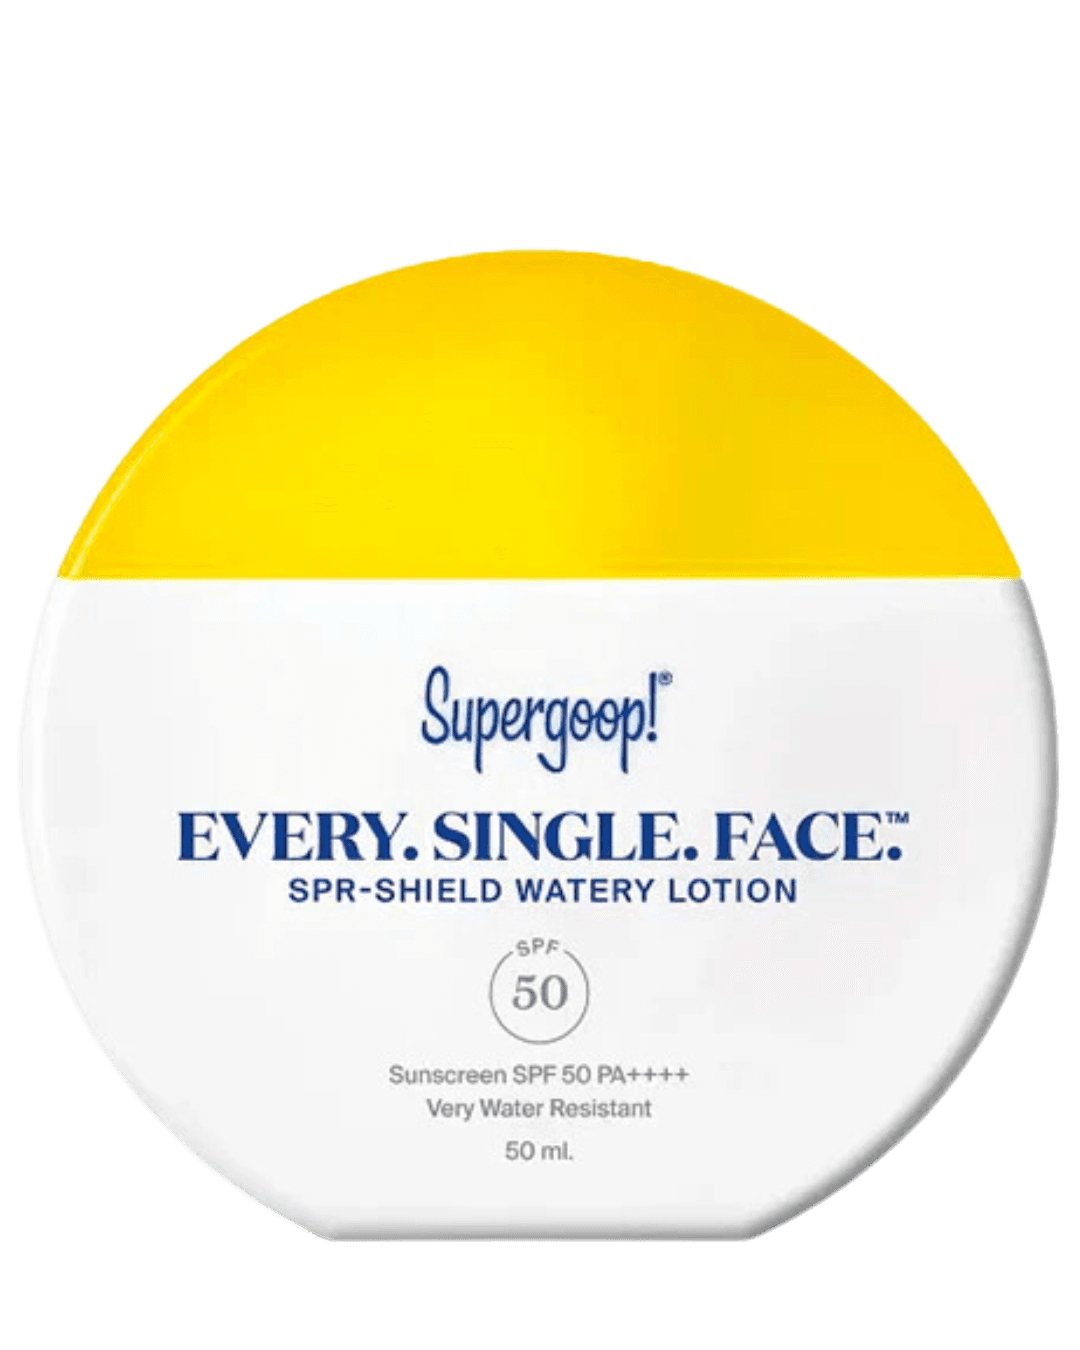 Supergoop! Every. Single. Face SPR-Shield Watery Lotion SPF50